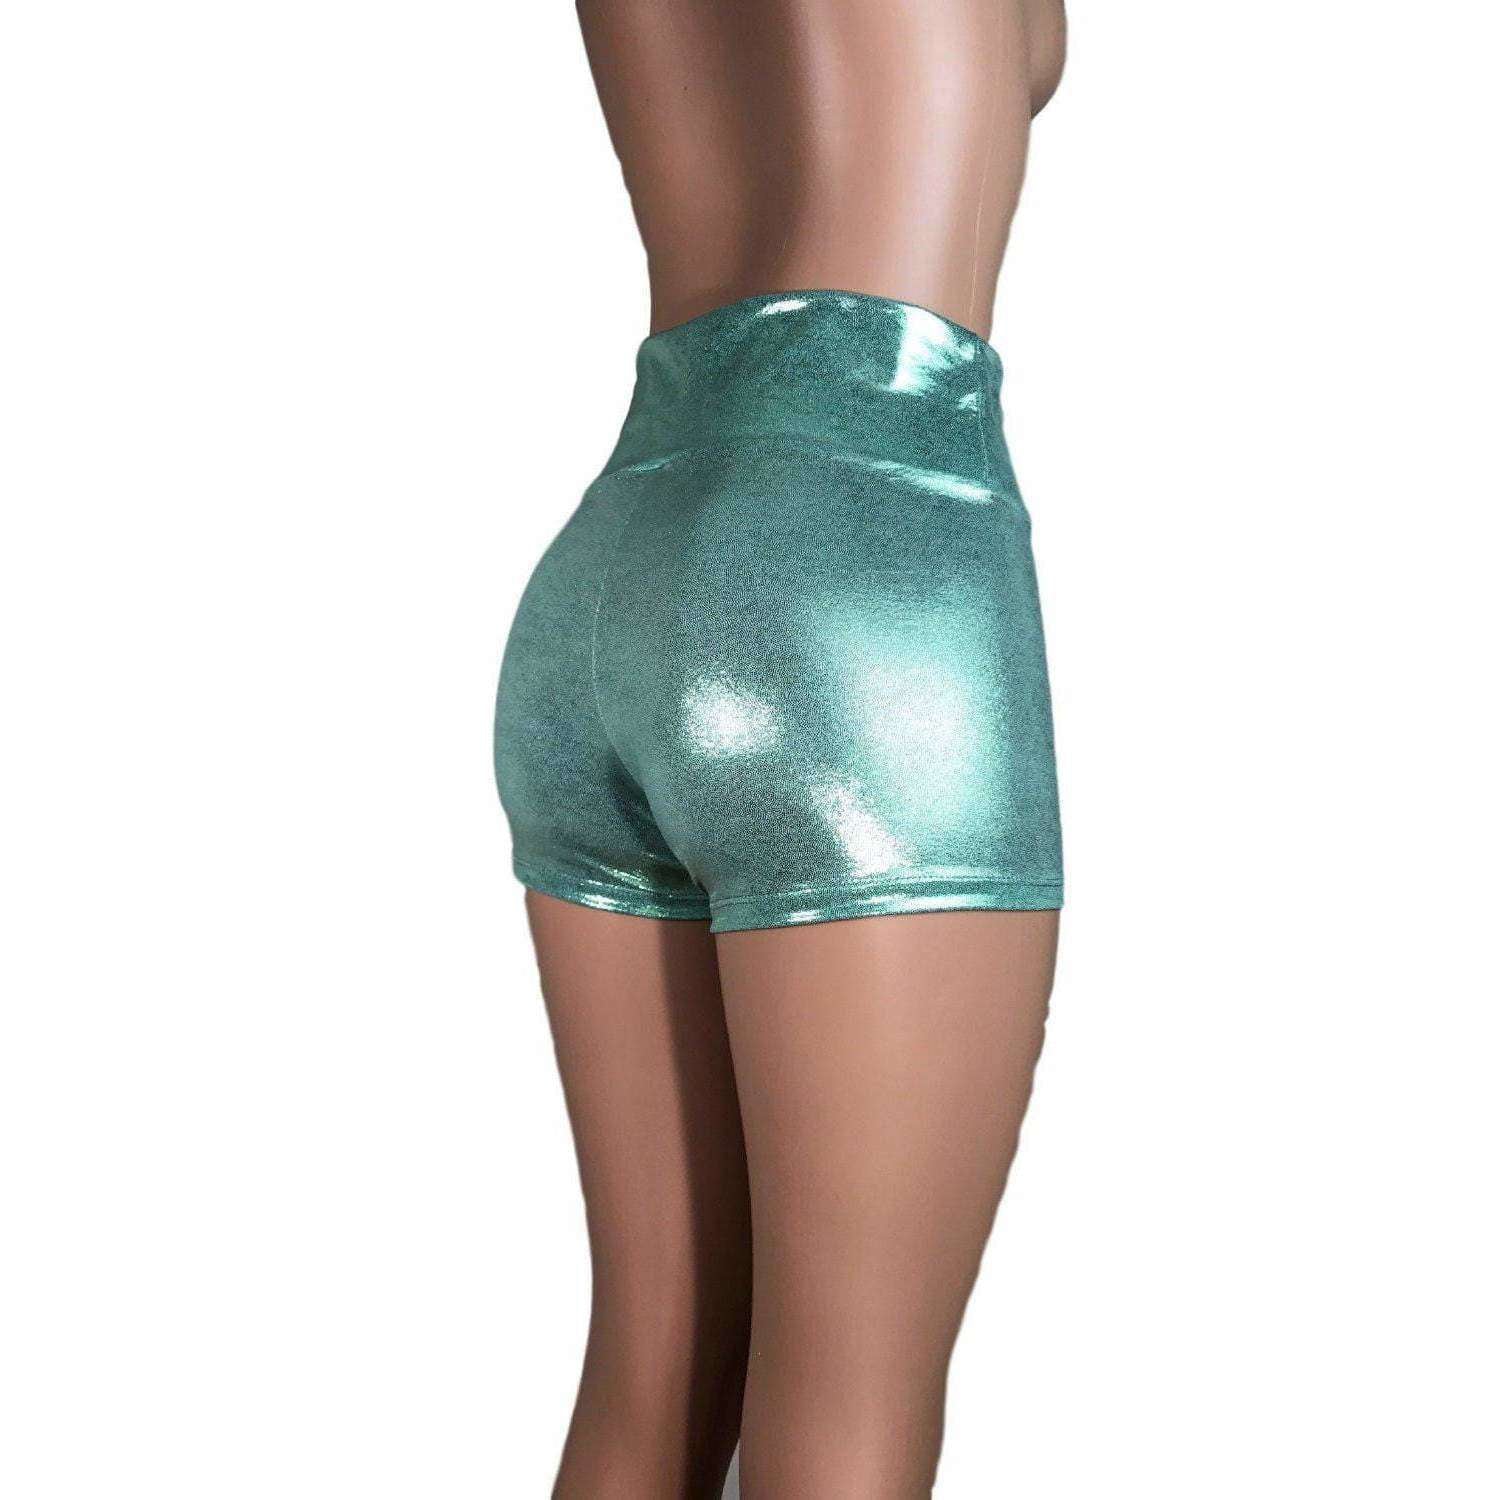 SALE - SMALL ONLY - High Waisted Booty Shorts - Mint Green Mystique